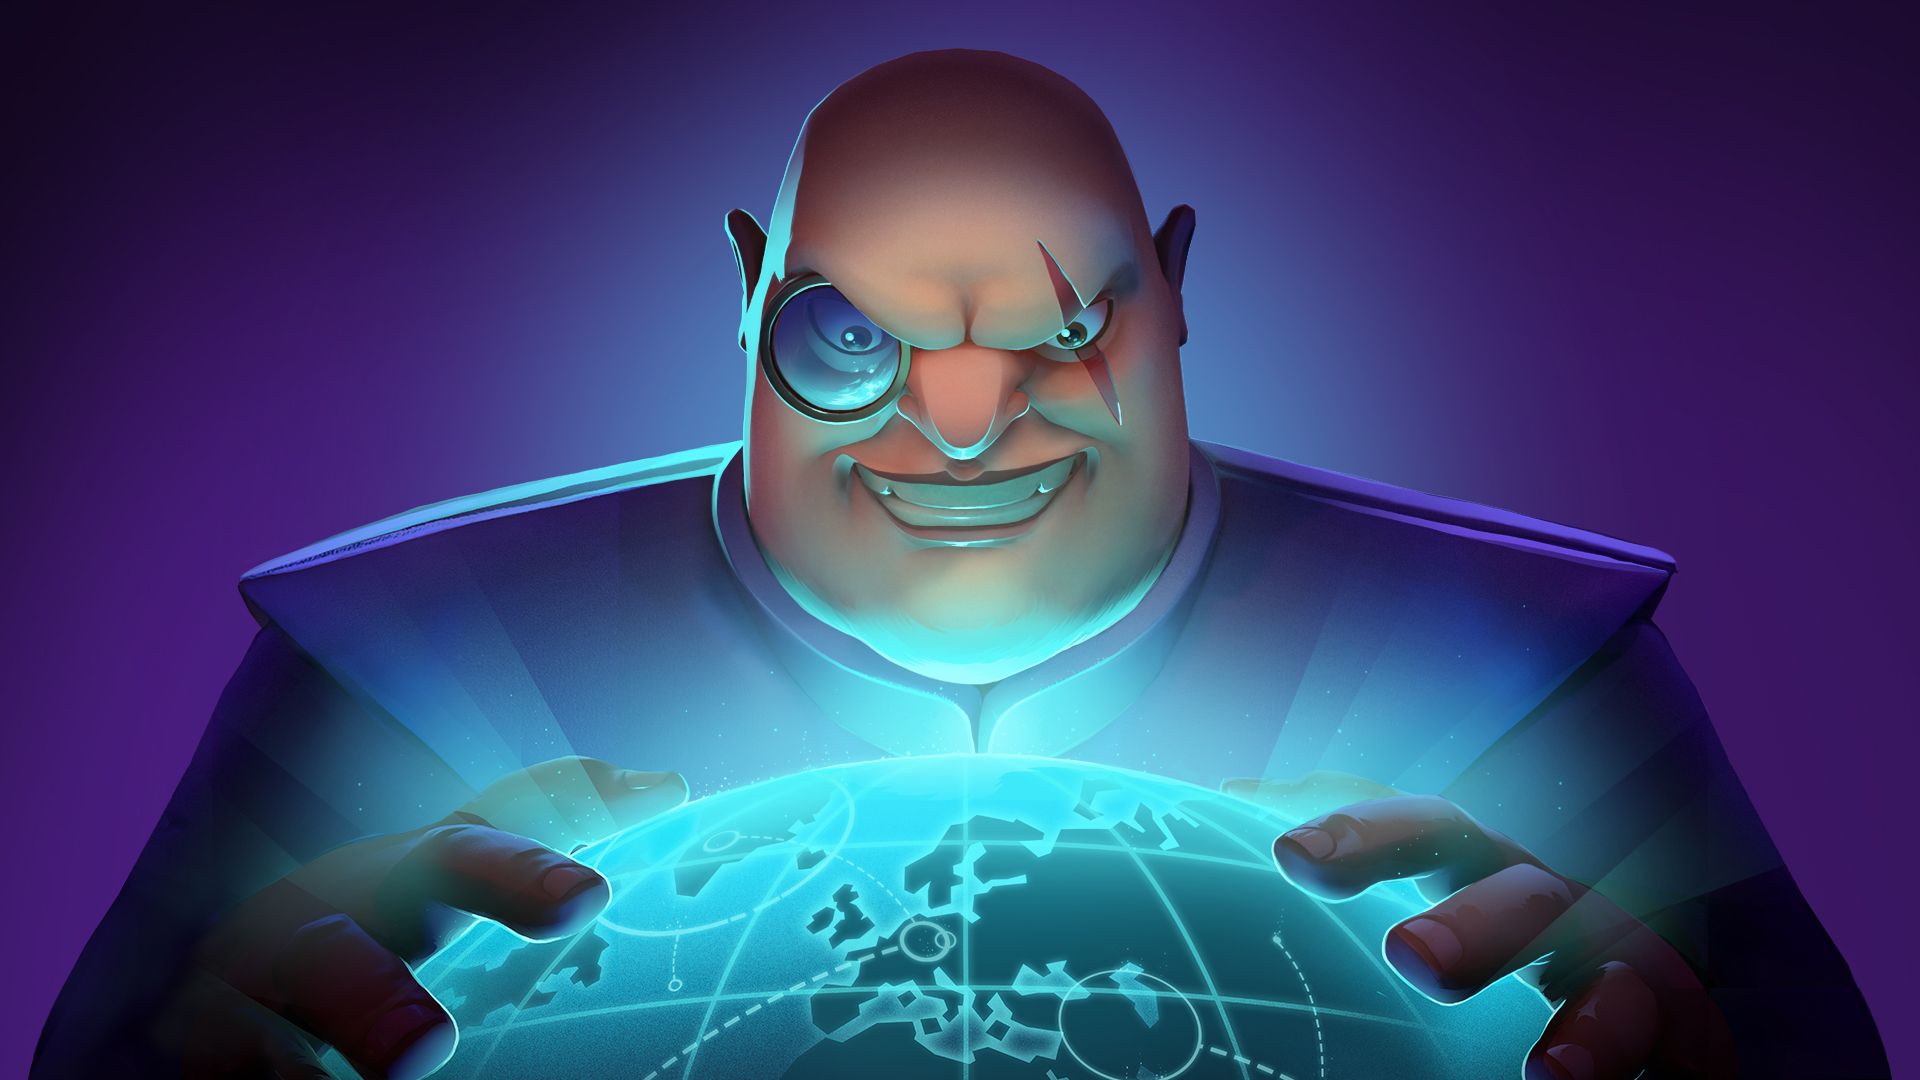 Evil Genius 2: World Domination Drops This March